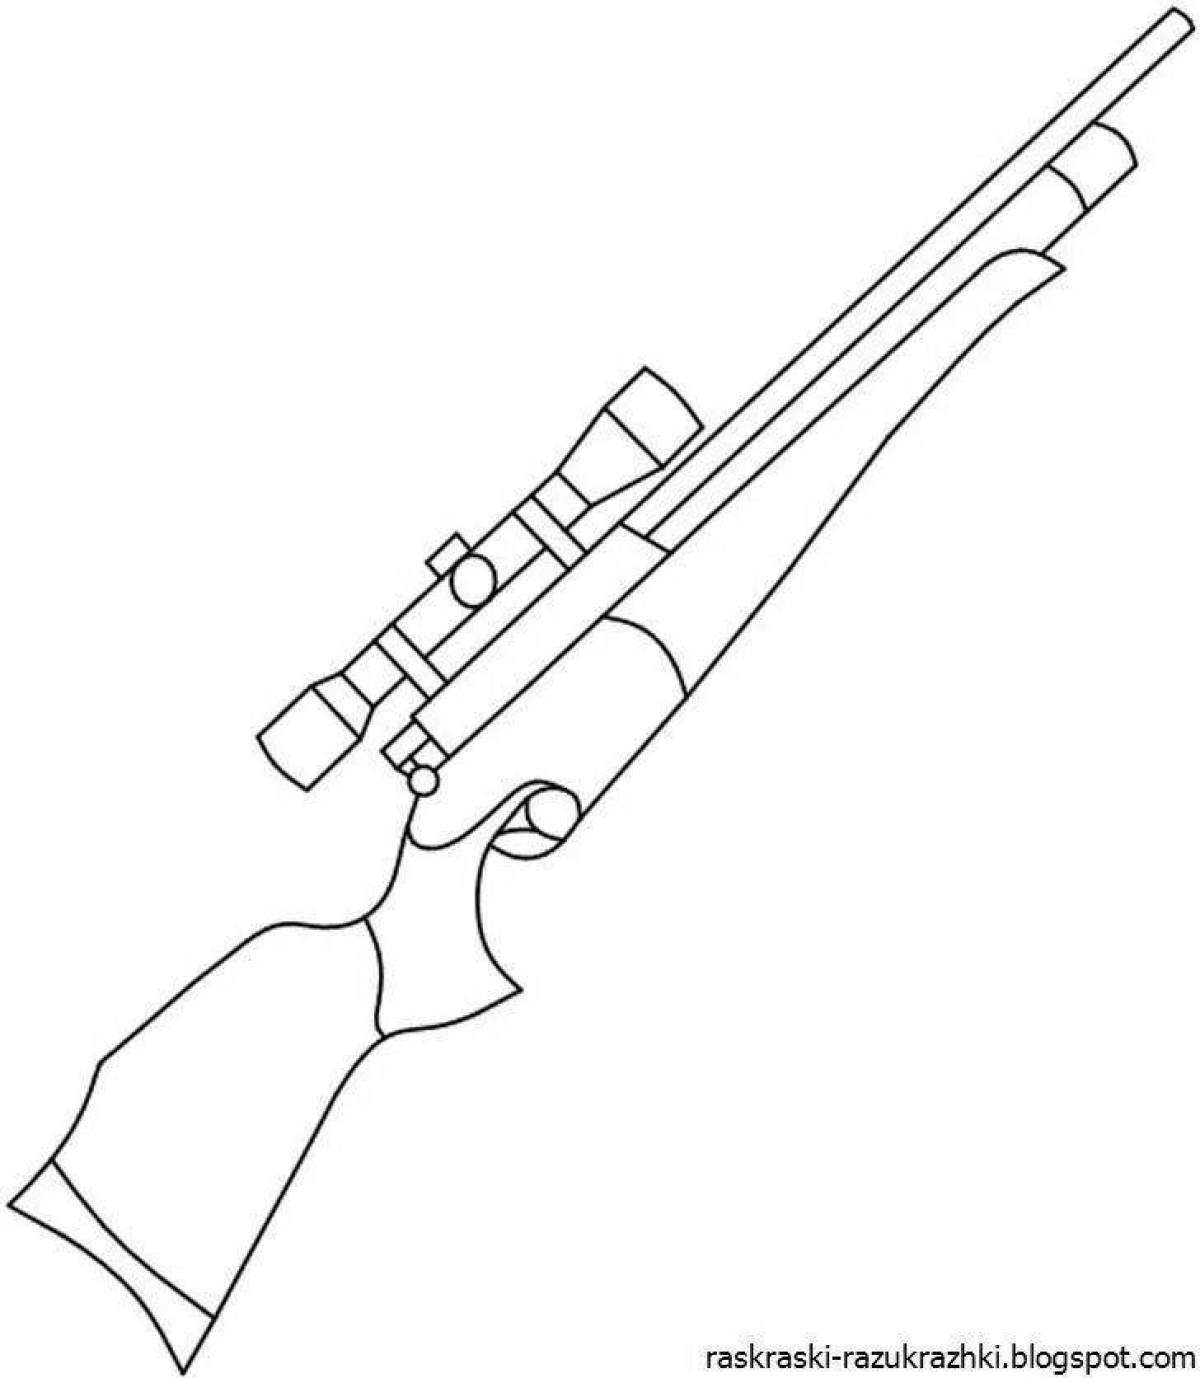 Attractive weapon coloring page